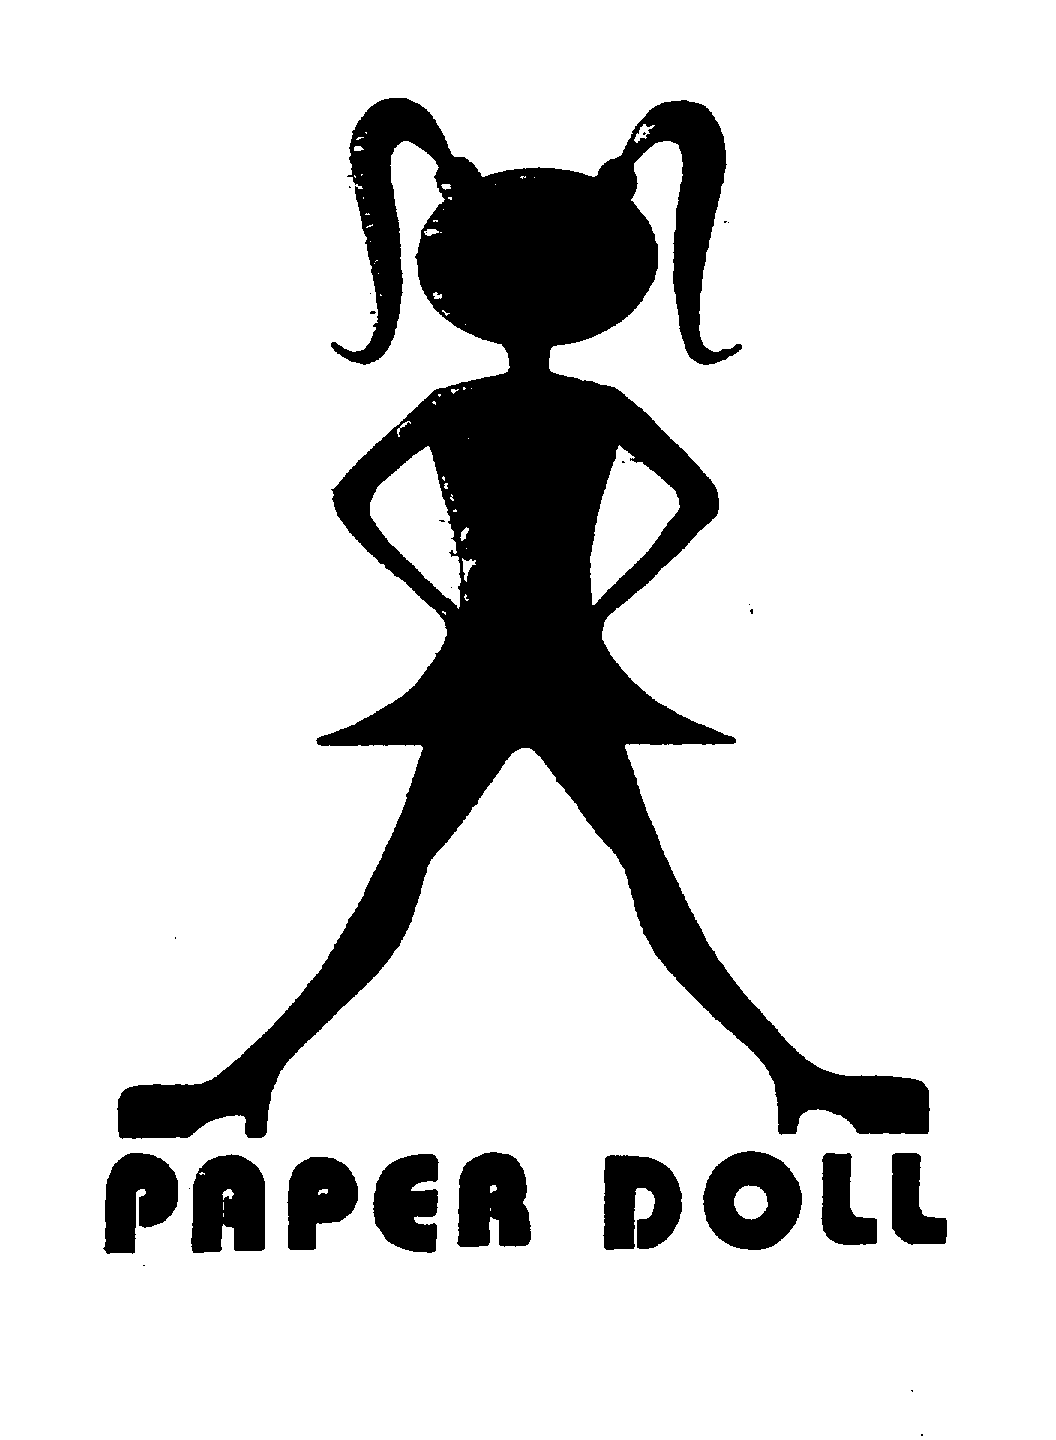 PAPER DOLL